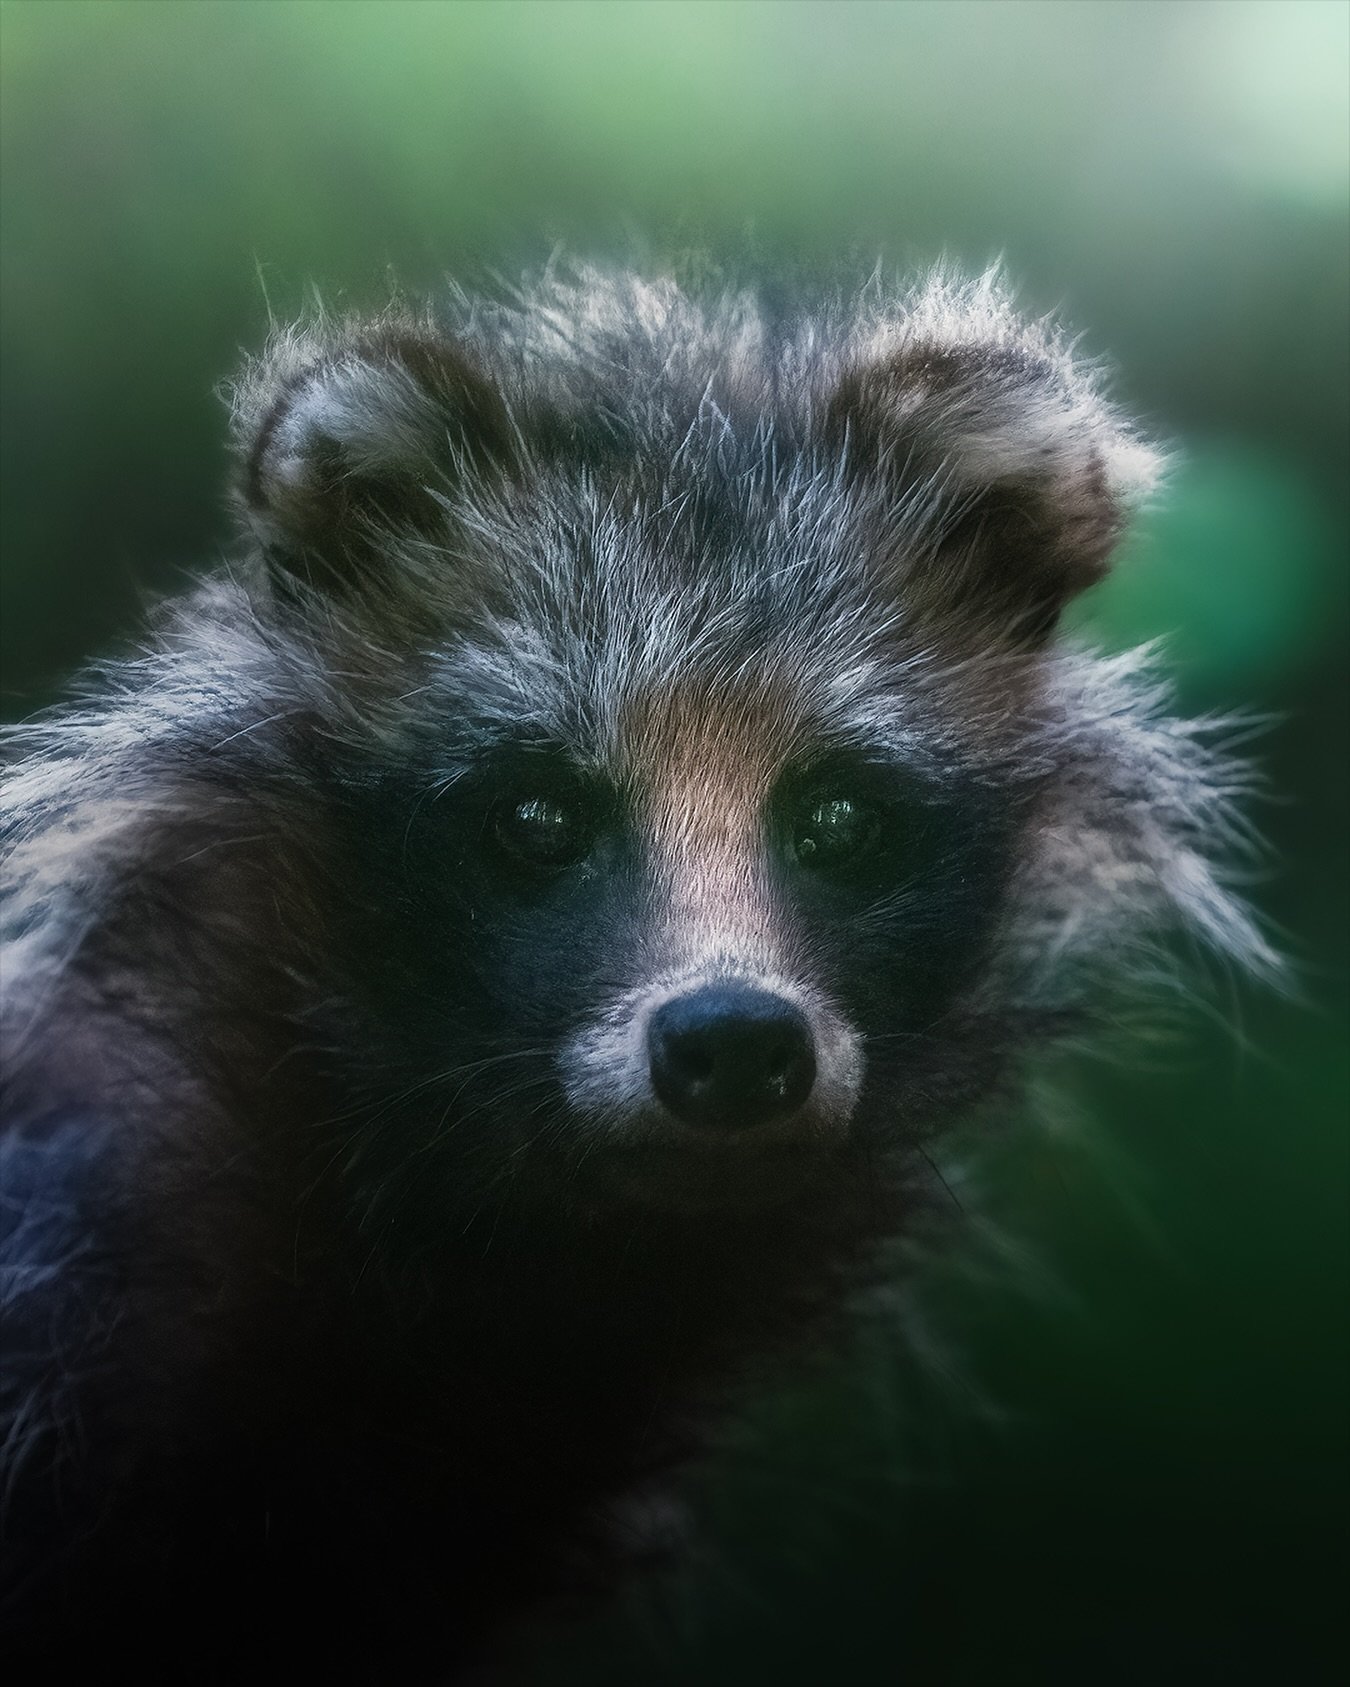 Yesterday I encountered a raccoon dog while trying to film another species. As an invasive species in Finland, these animals are a point of controversy. Without going deep into the politics, I made a portrait picture of it before it went quickly unde